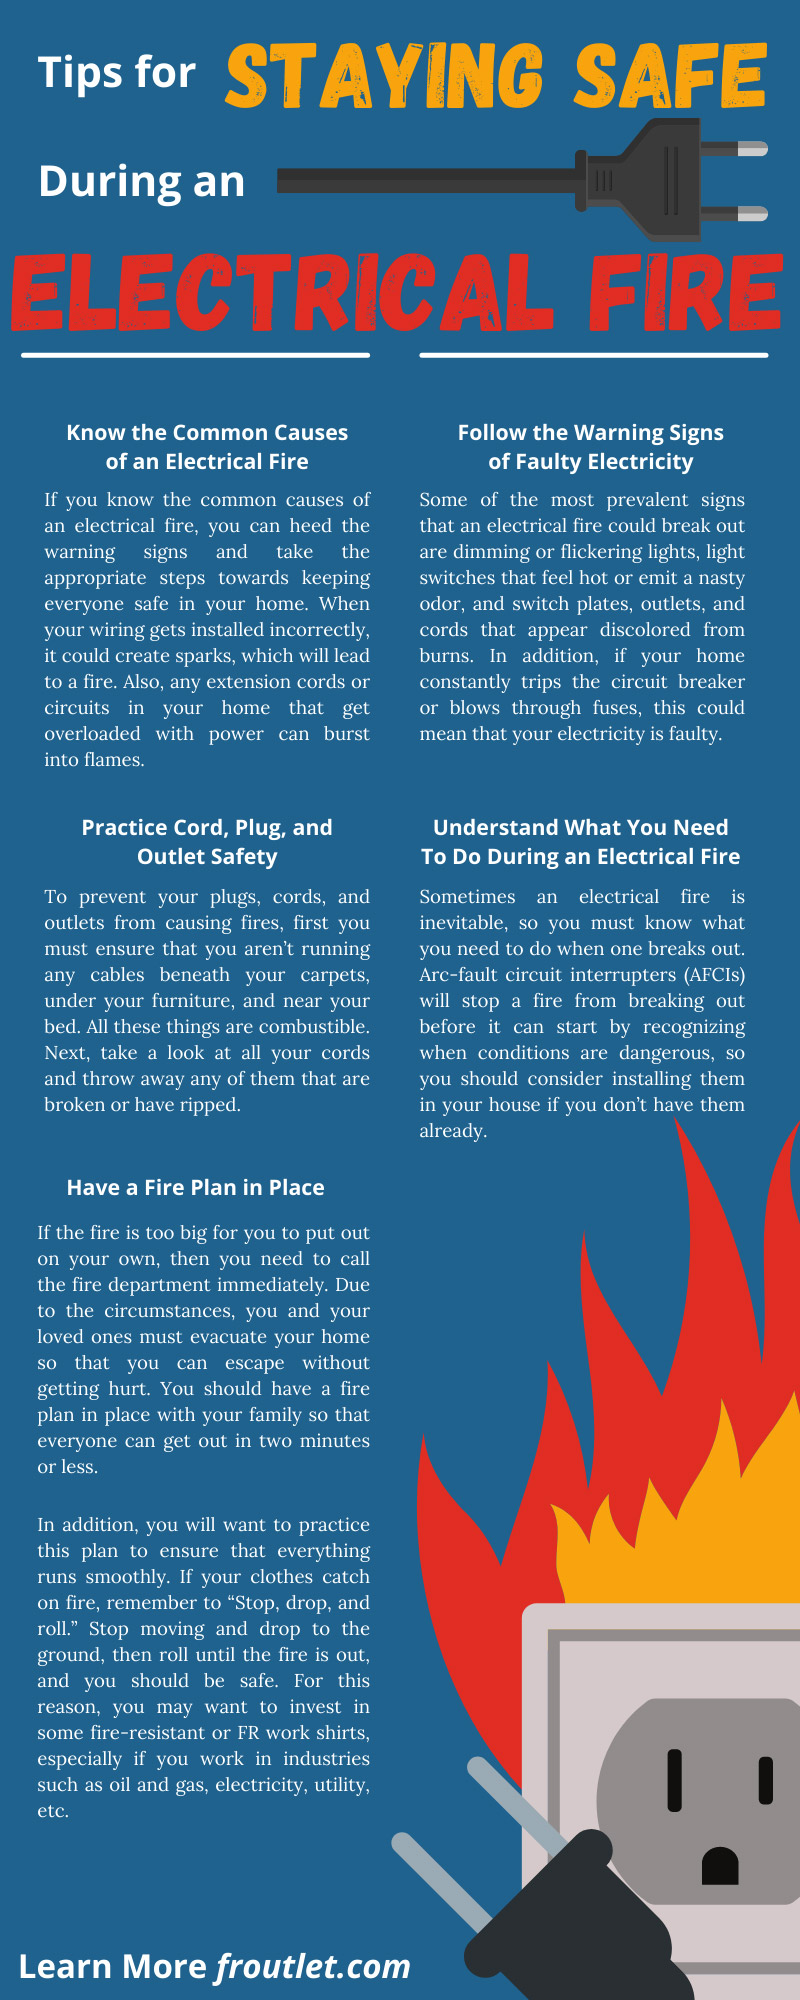 Tips for Staying Safe During an Electrical Fire